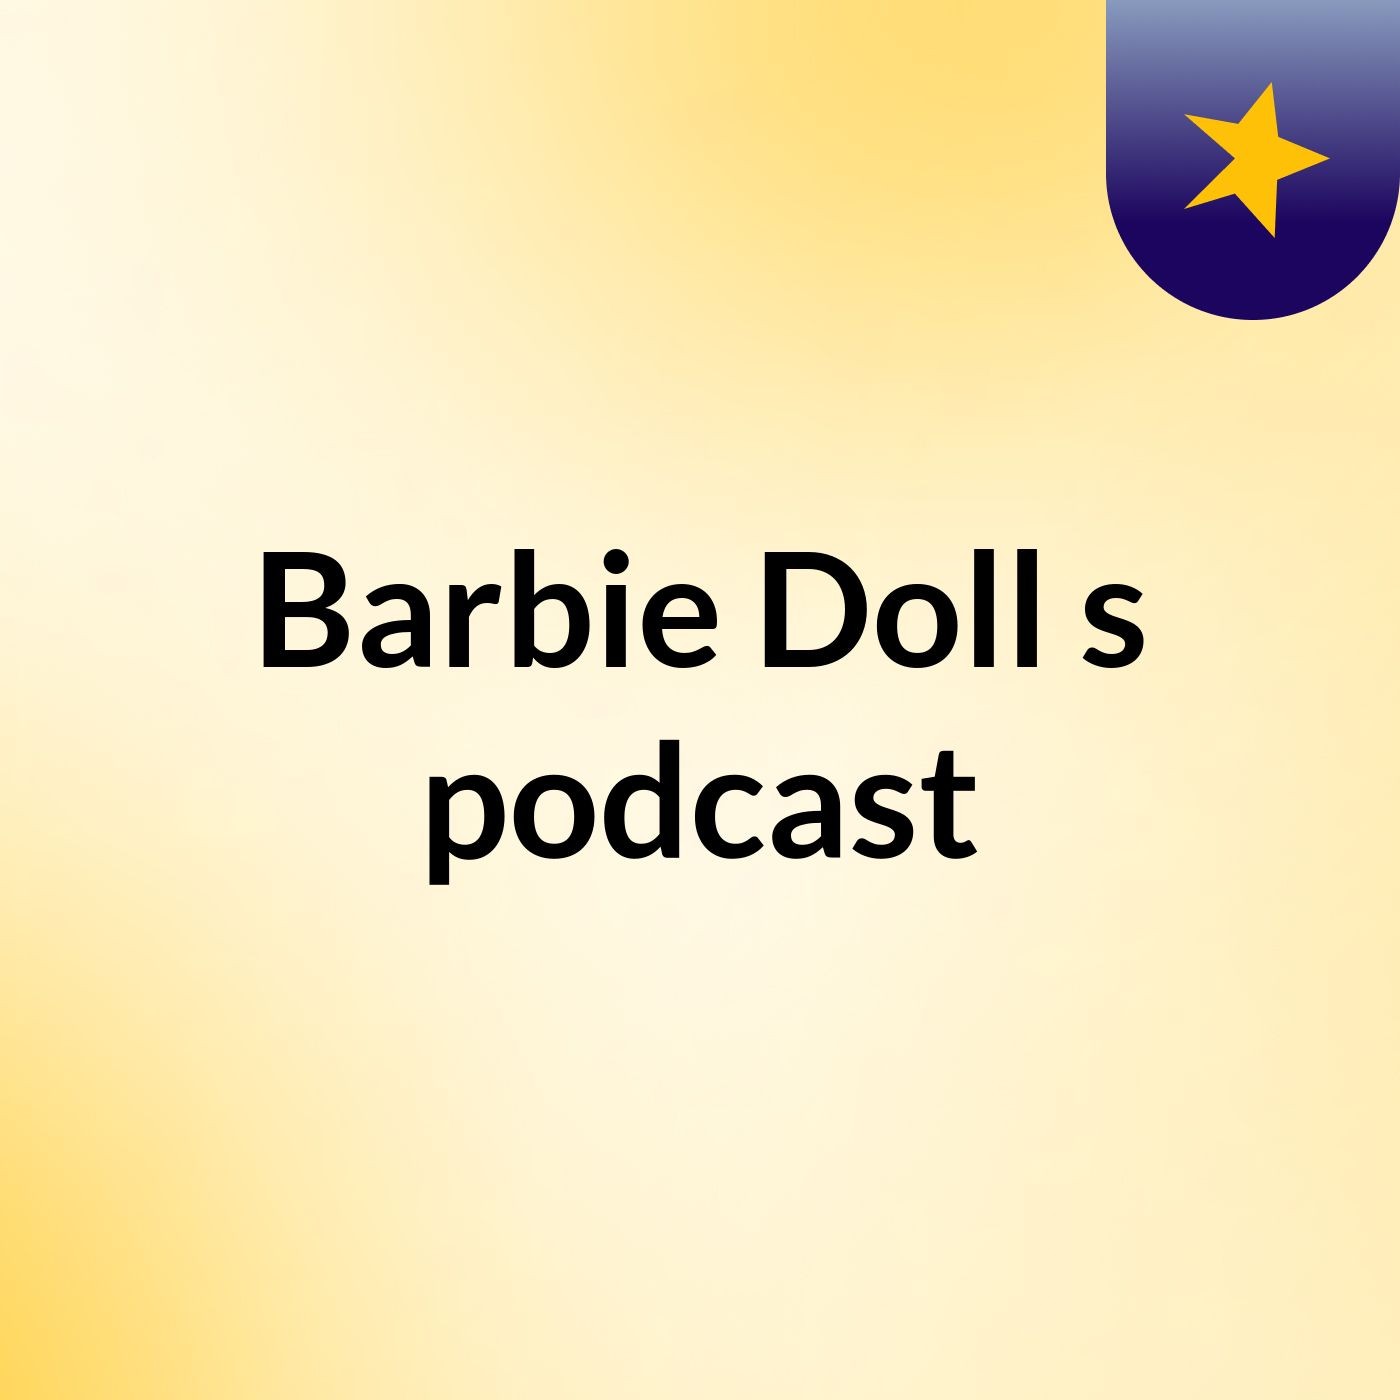 Episode 2 - Barbie Doll's podcast